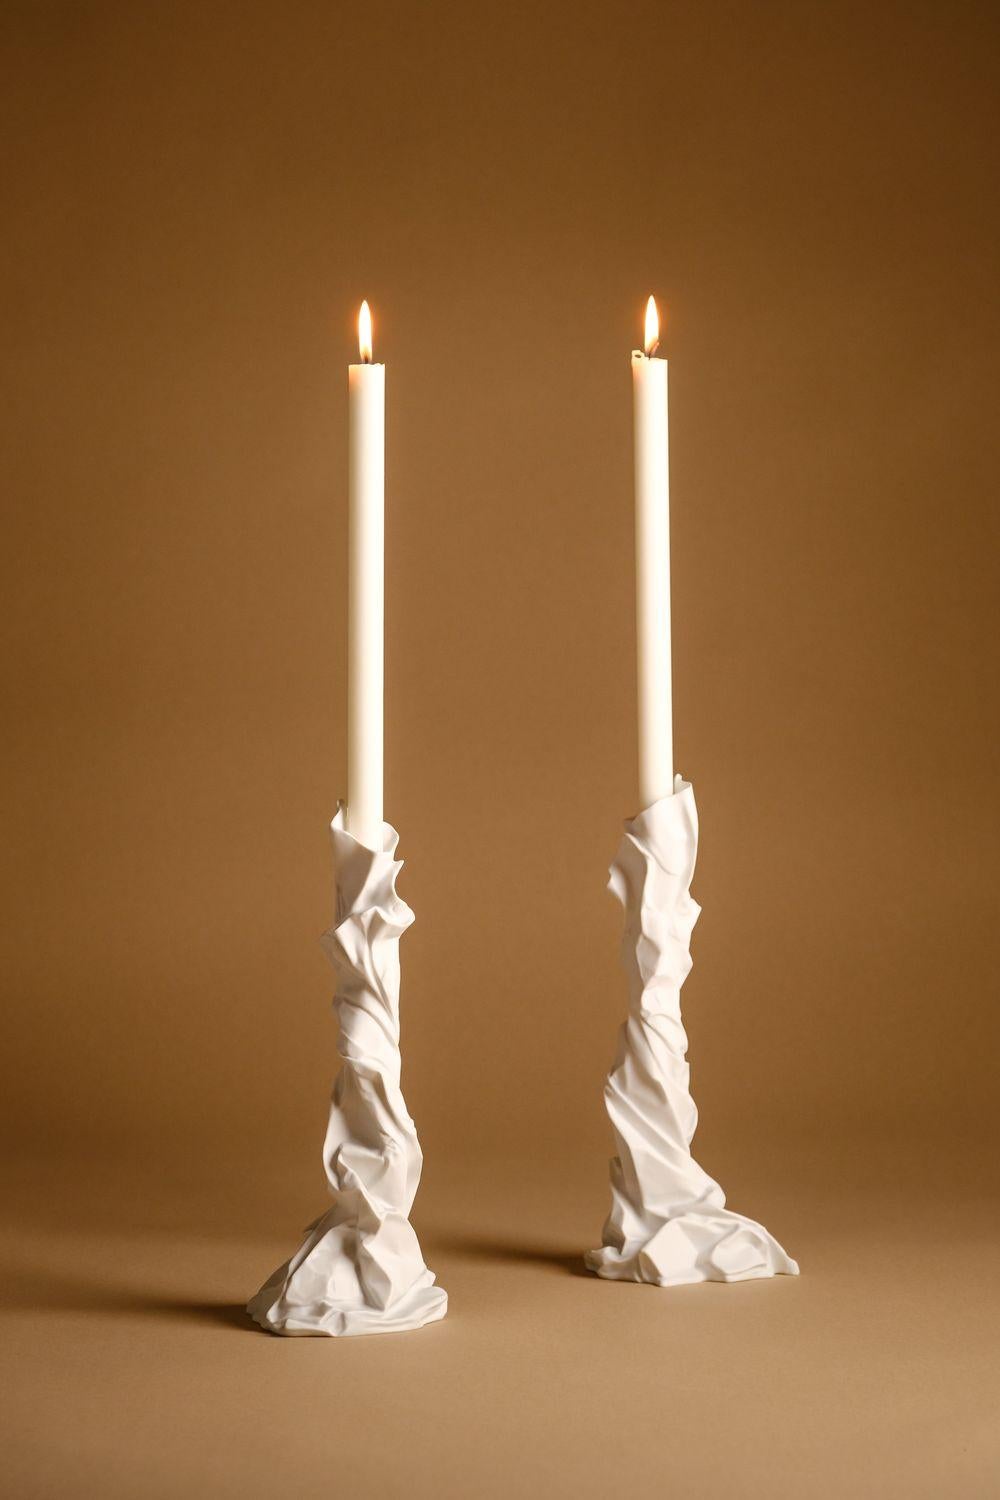 Charta candlestick by Studio Palatin
Dimensions: H 33.5 x D 16 cm
Materials: biscuit porcelain.

The artist’s inspiration for the Charta Alba Collection came from a series of sculptures formed from brown wrapping paper salvaged from an Amazon